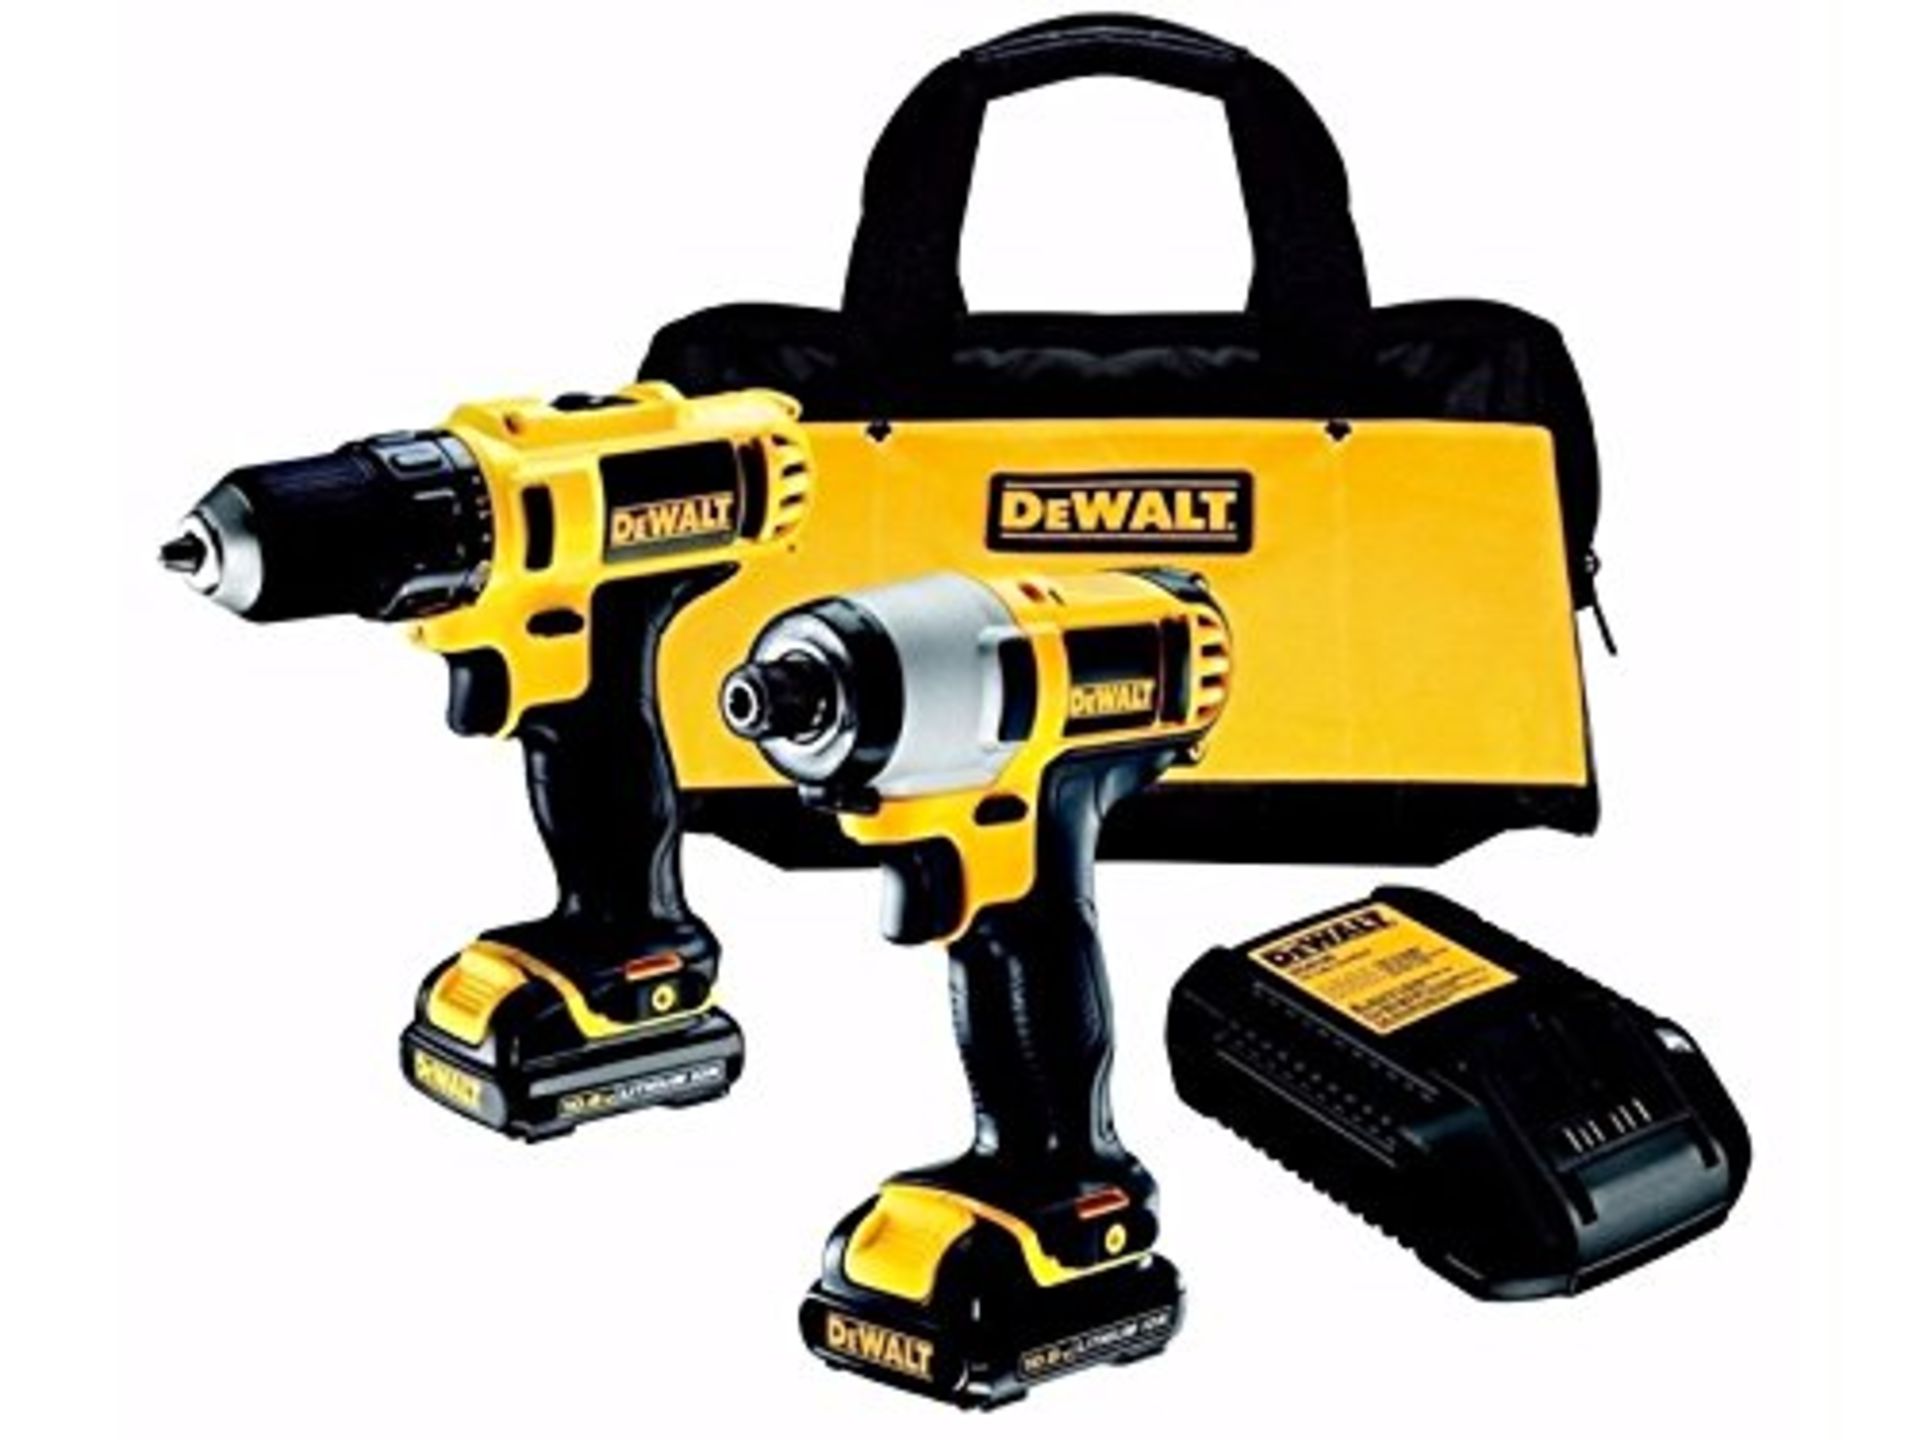 1 x DeWalt DCK211C2 10.8 Volt Compact Drill Driver and Impact Driver Twin Pack in Kitbag | EAN: 5035 - Image 2 of 5